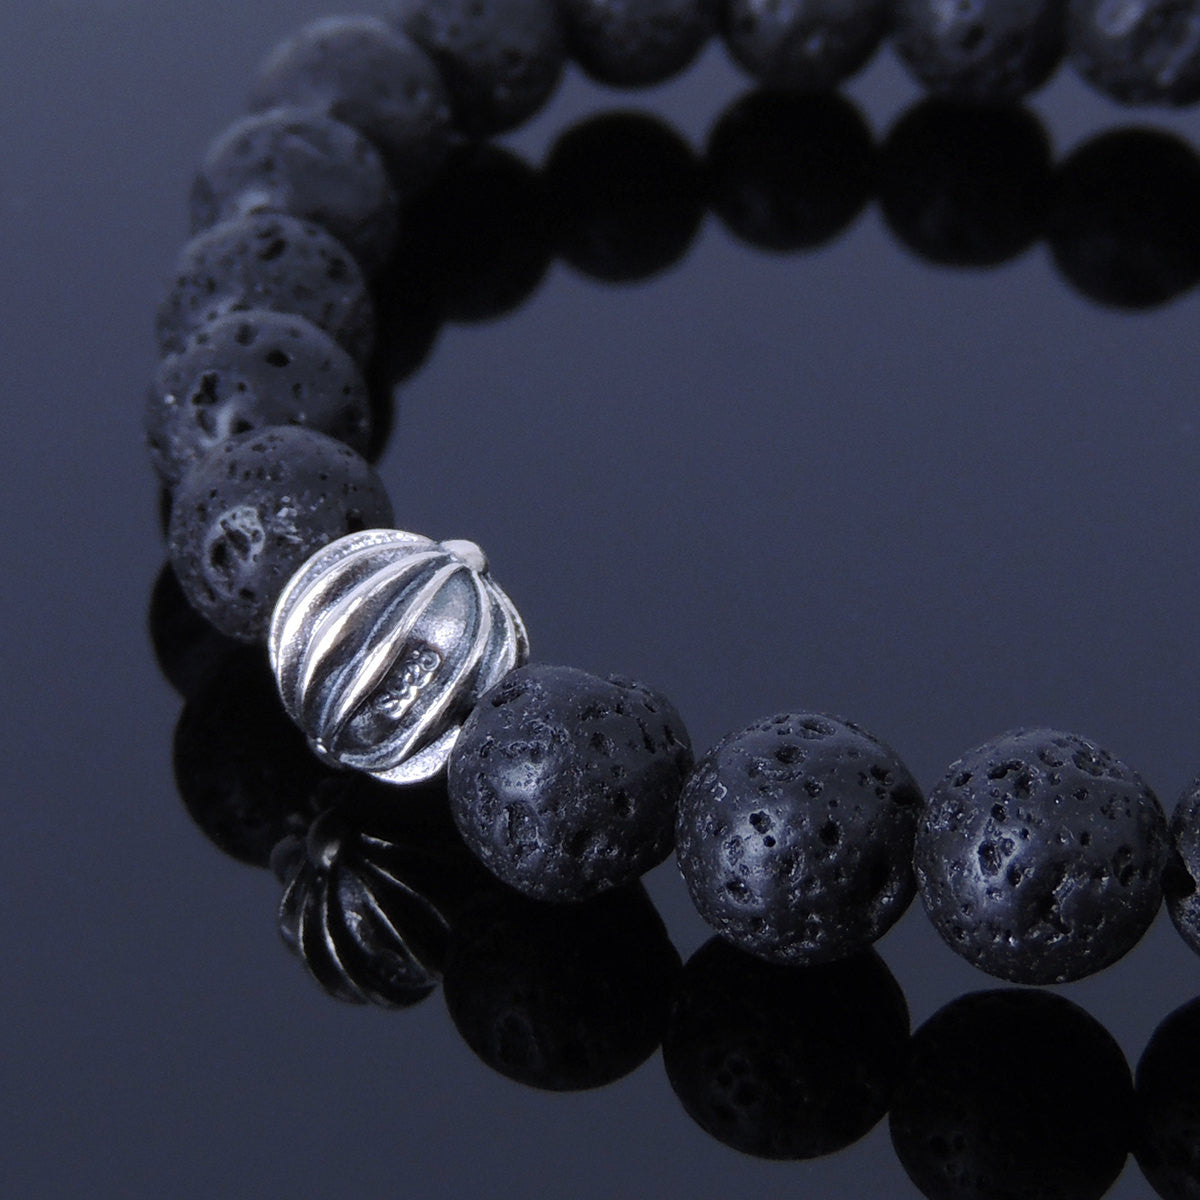 8mm Lava Rock Healing Stone Bracelet with S925 Sterling Silver Star Bead - Handmade by Gem & Silver BR298